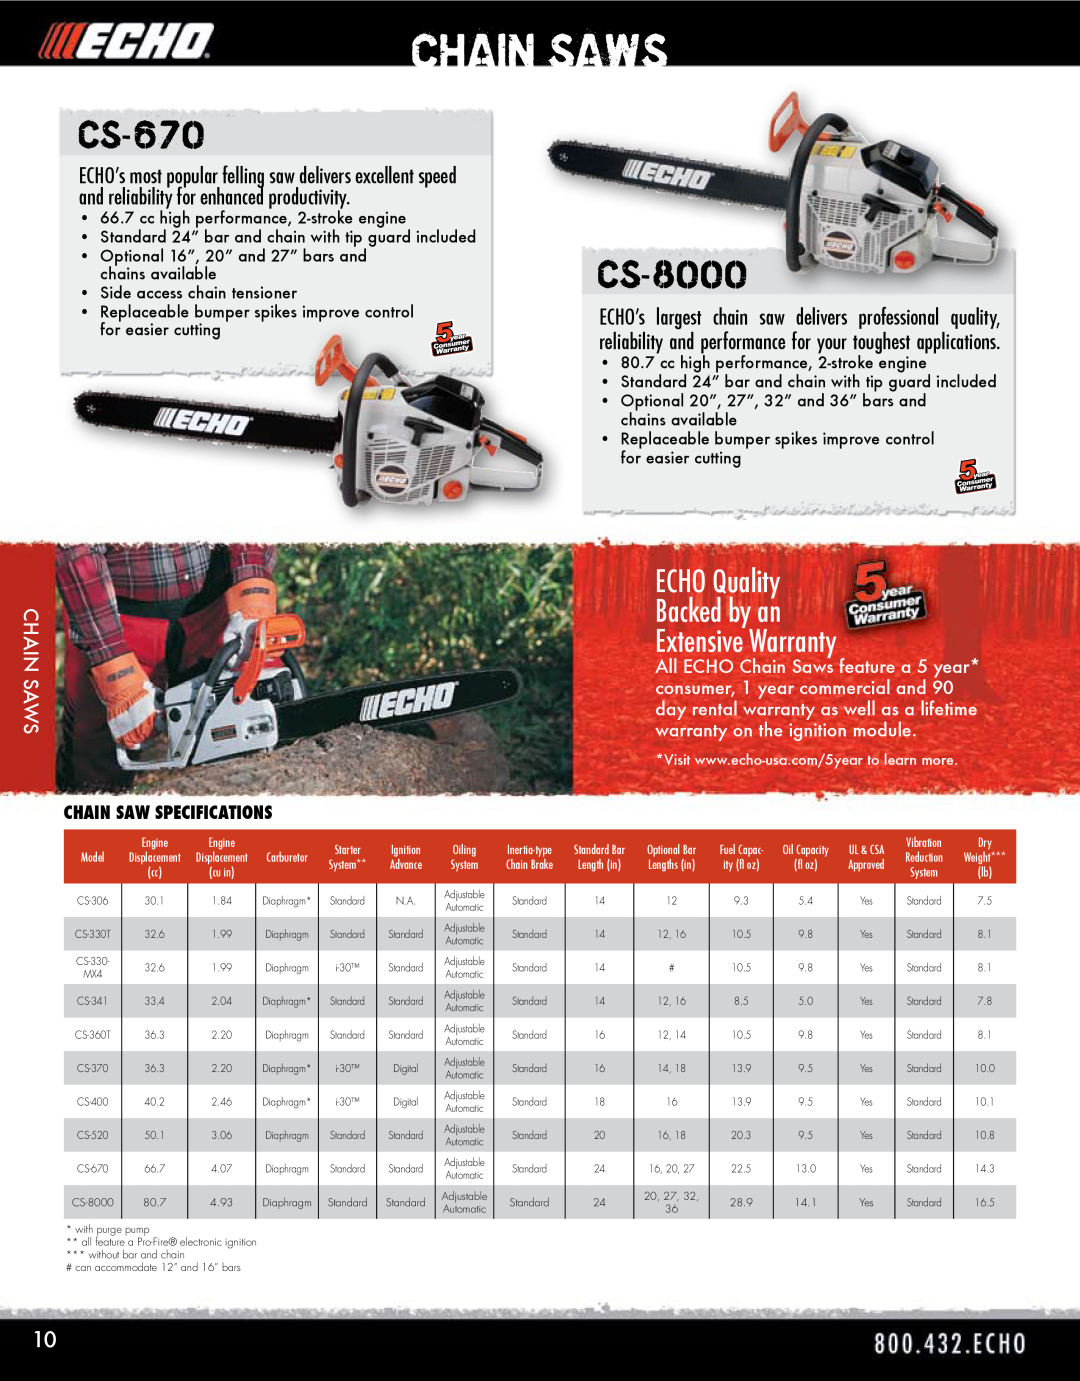 Echo HV-110XG manual CS-670, CS-8000, ECHO Quality Backed by an Extensive Warranty, Chain Saws, Chain Saw Specifications 